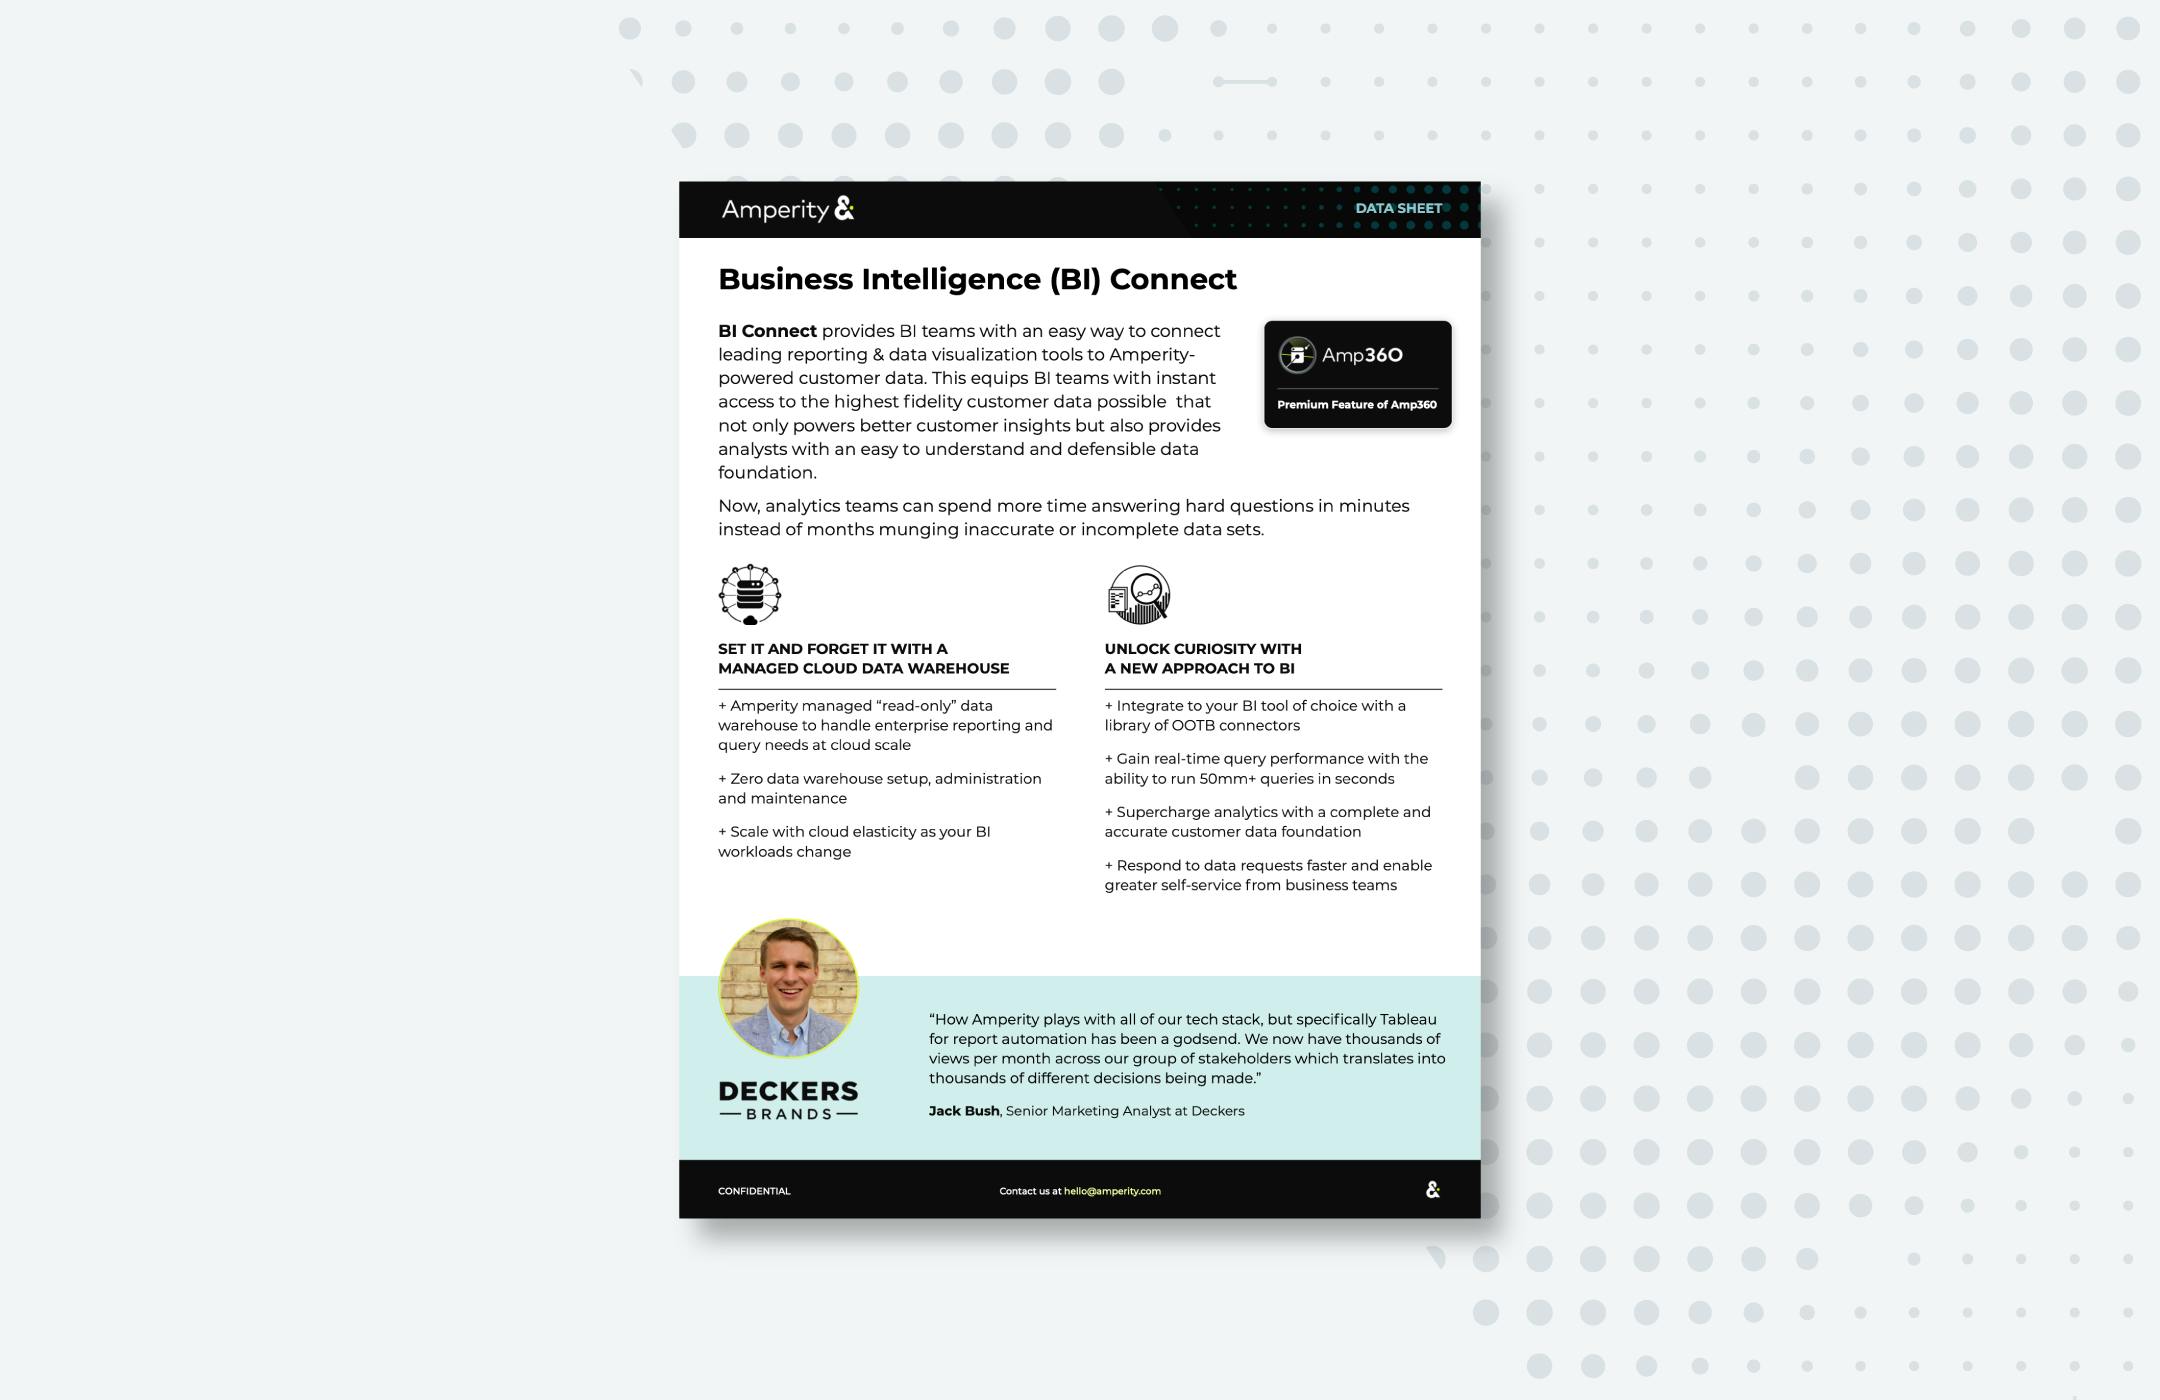 Stylized image of the Business Intelligence Connect quick guide